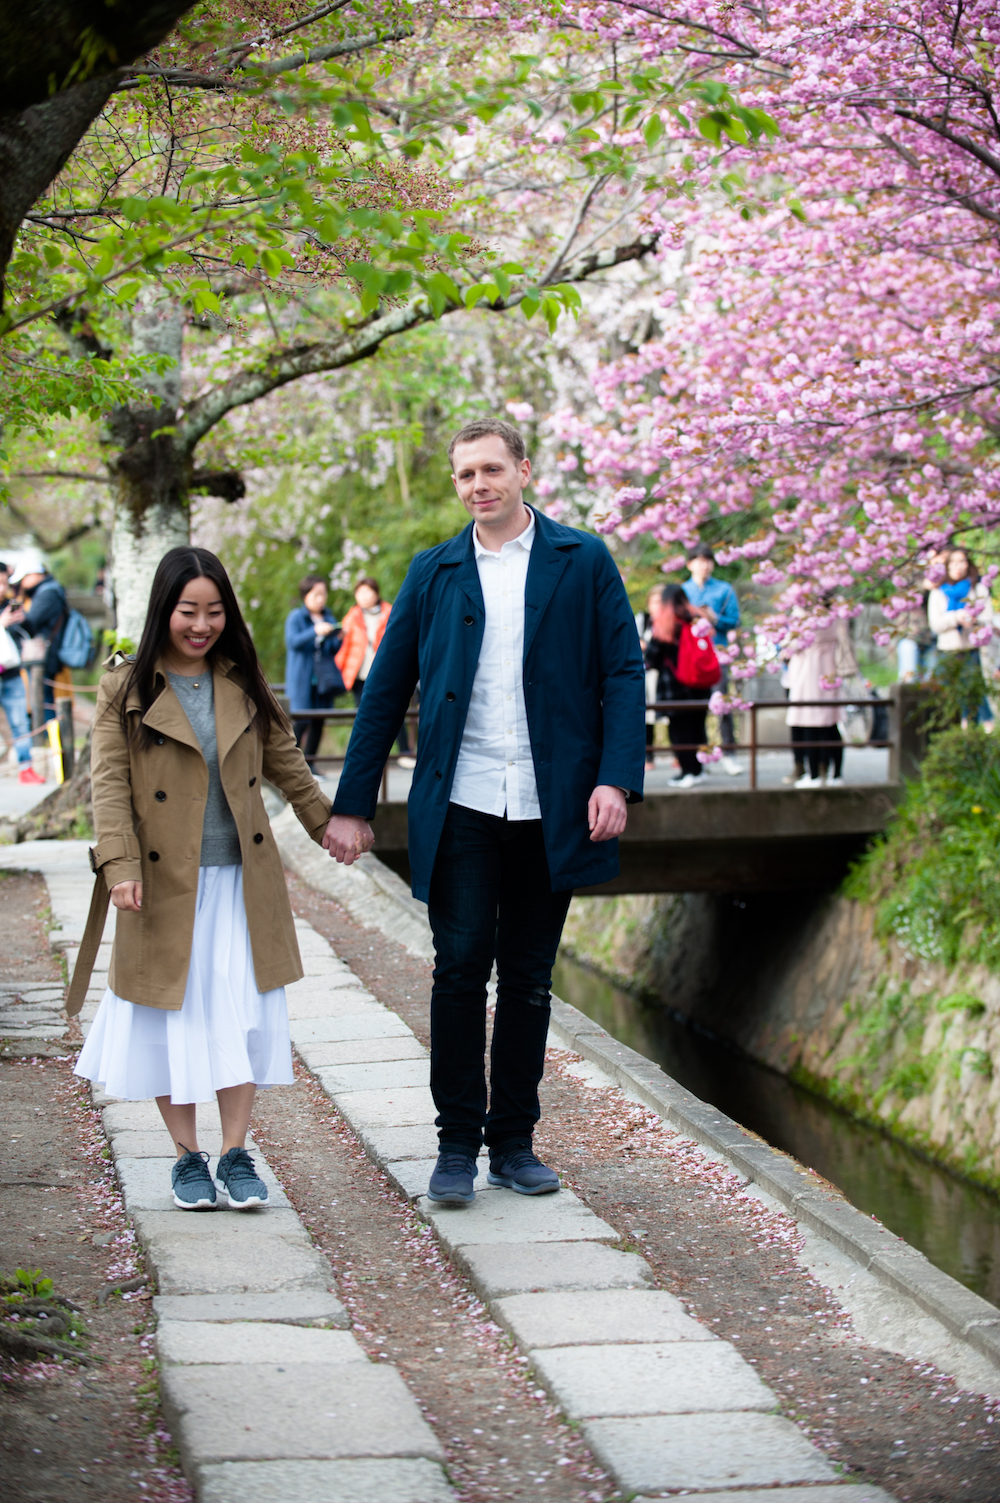 My Japan engagement story